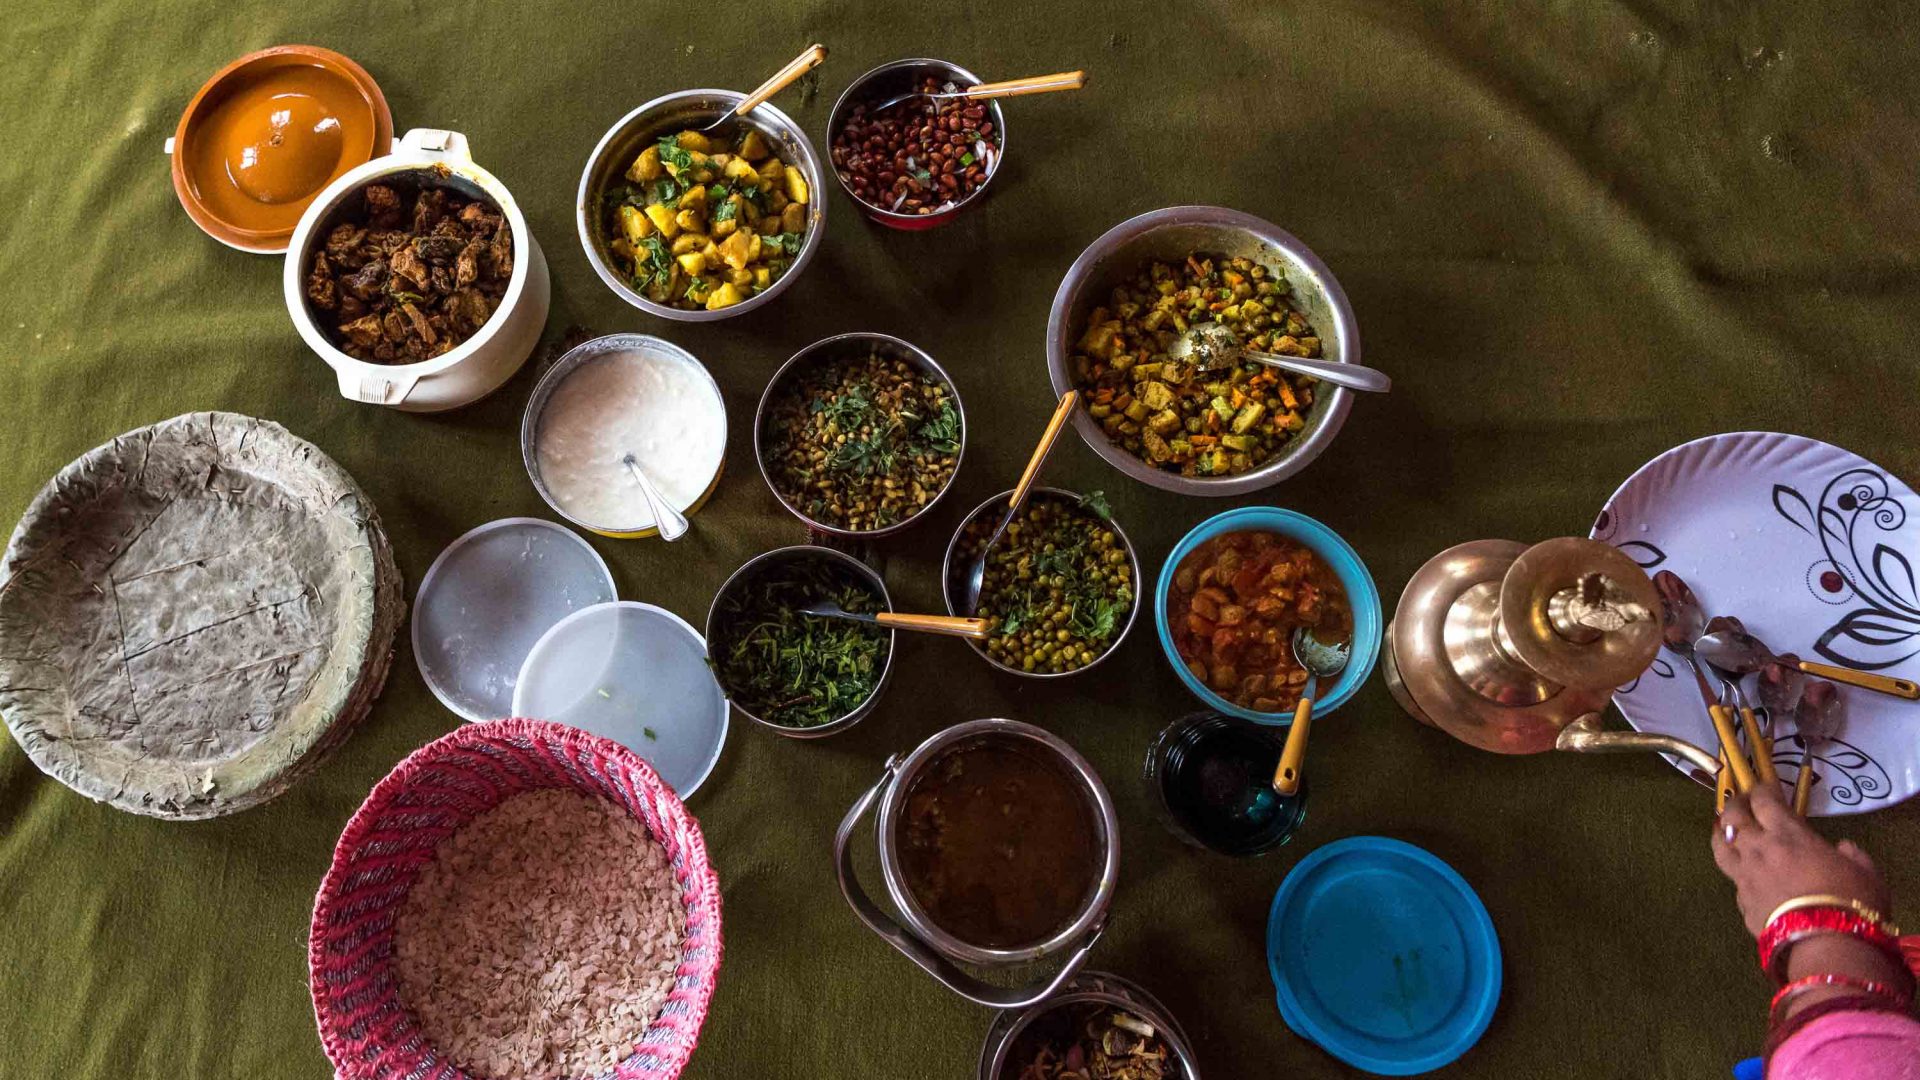 A meal is served up in Panauti, Nepal.